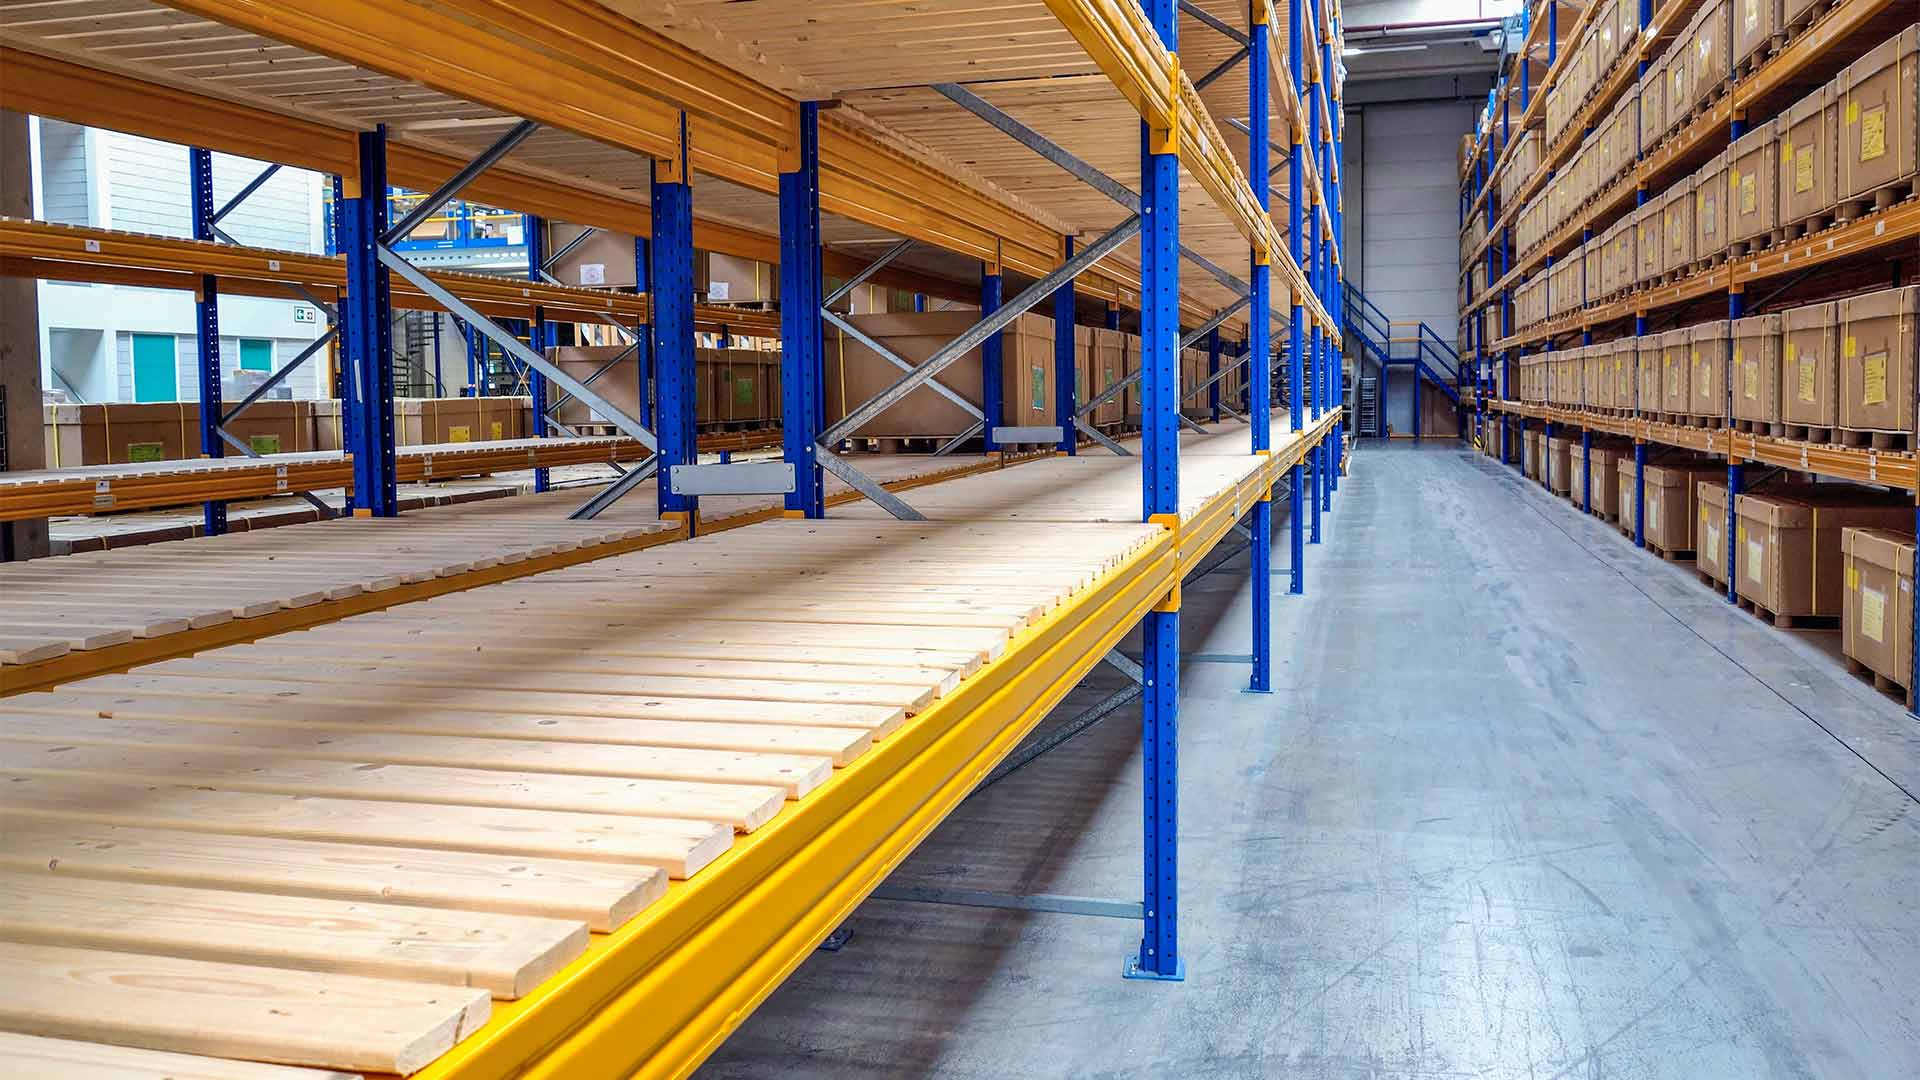 Empty shelves in a warehouse